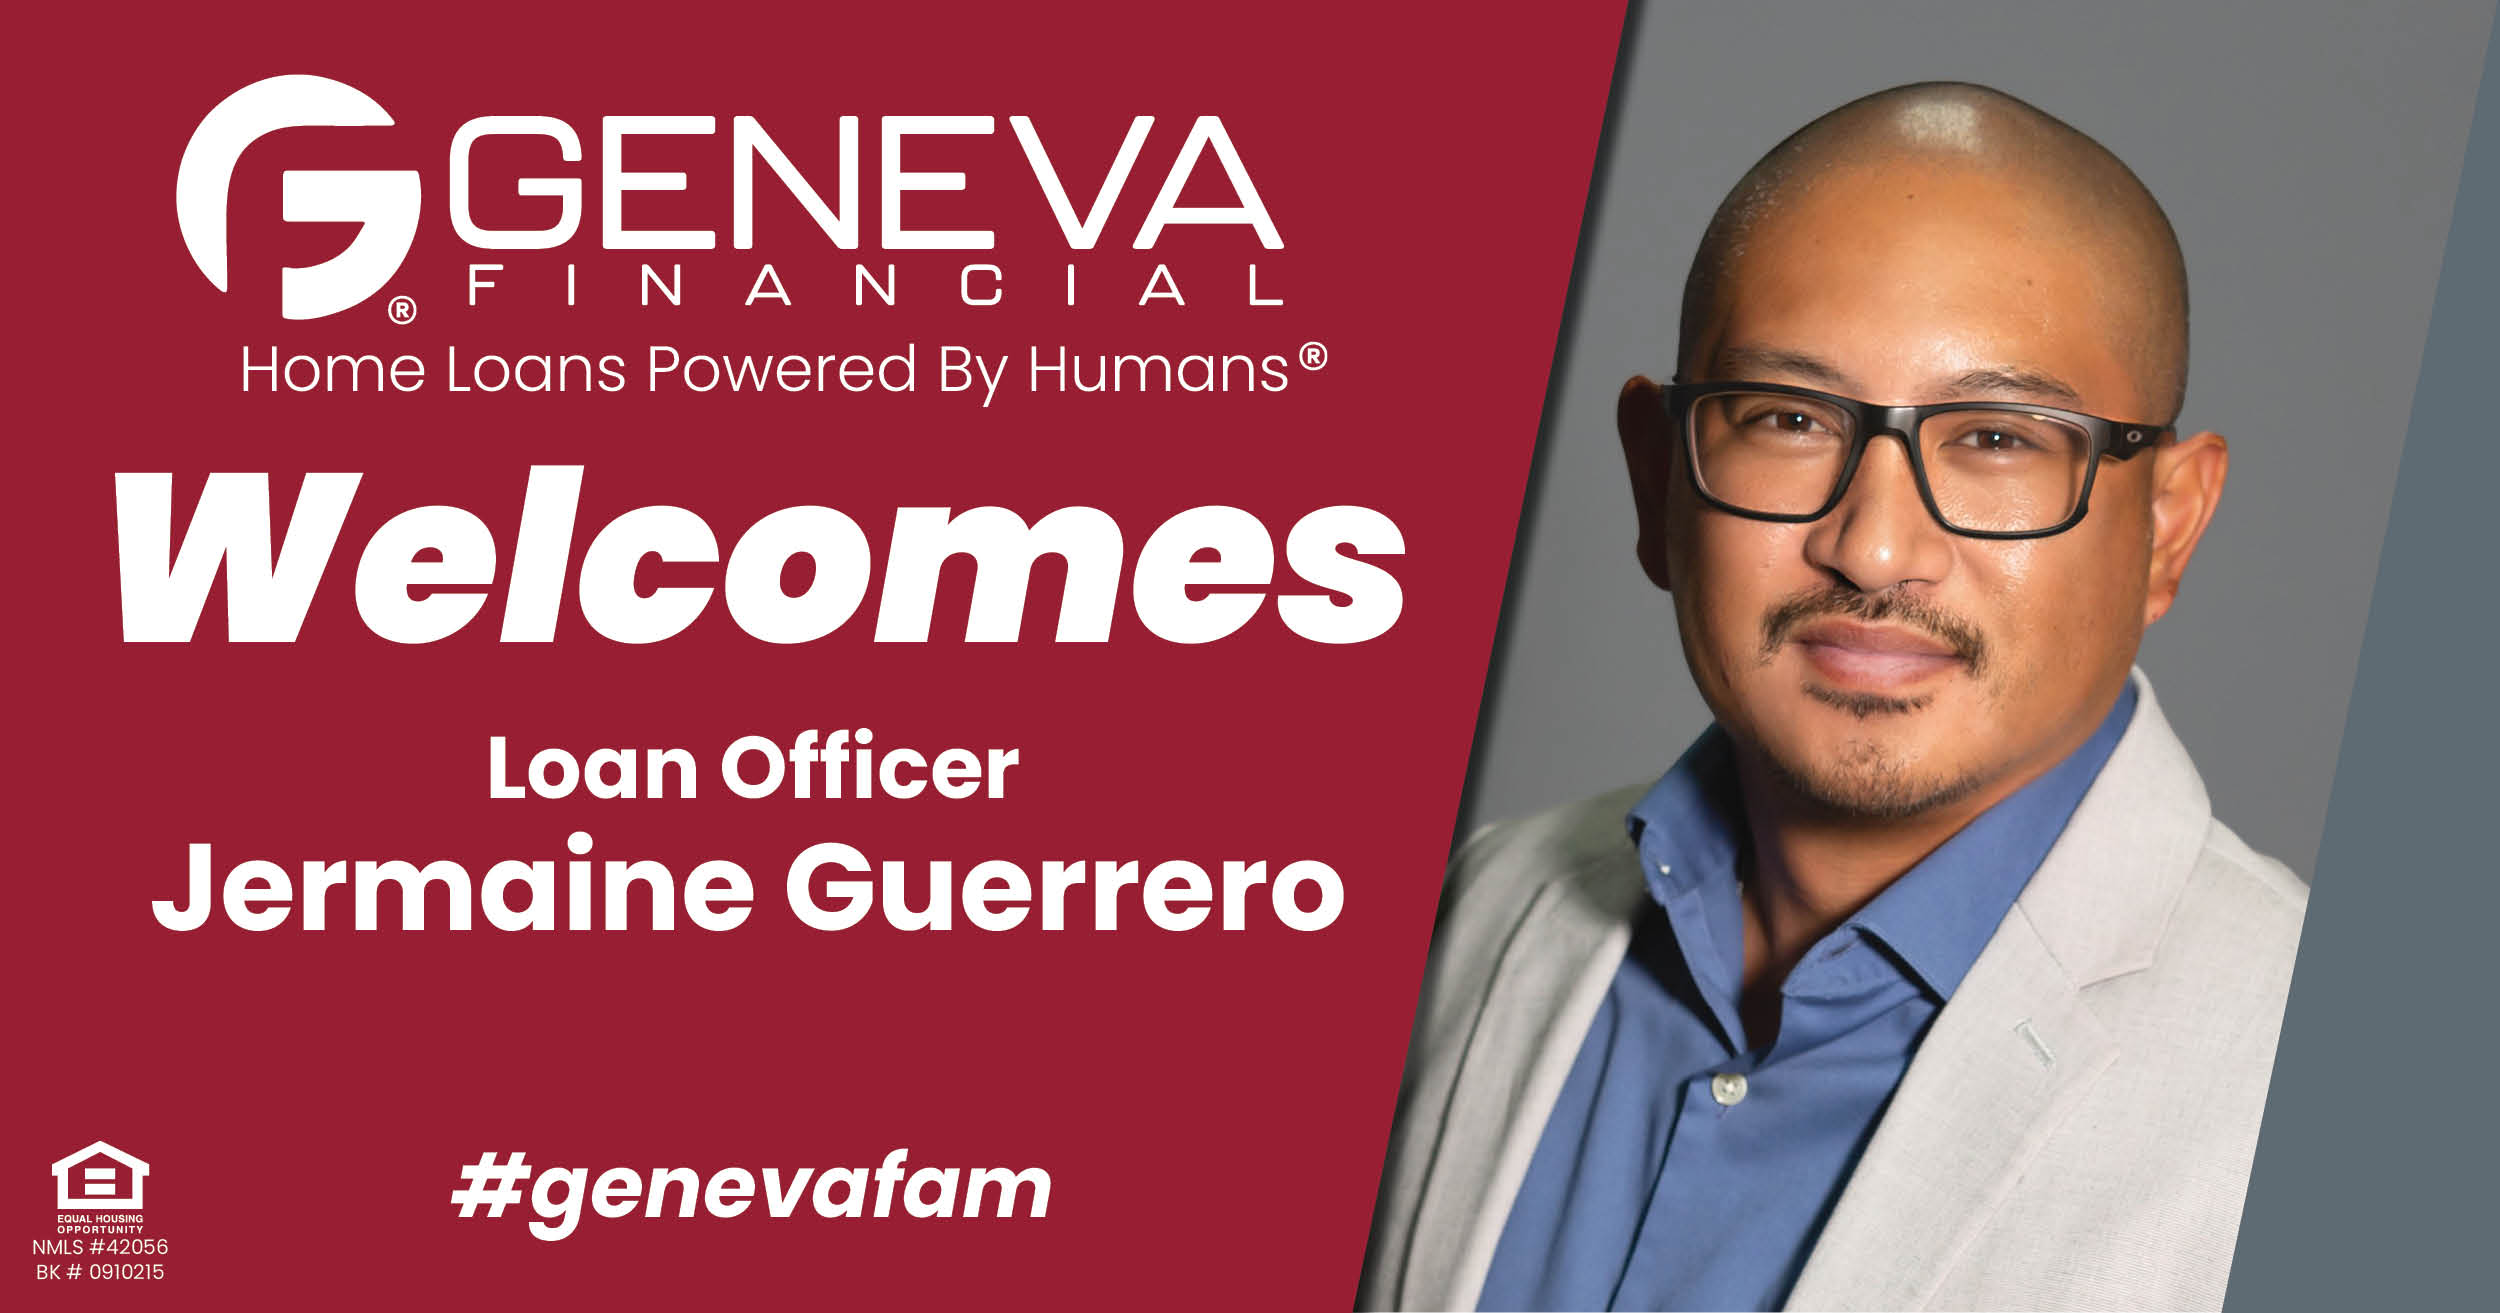 Geneva Financial Welcomes New Loan Officer Jermaine Guerrero to Glendale, Arizona – Home Loans Powered by Humans®.